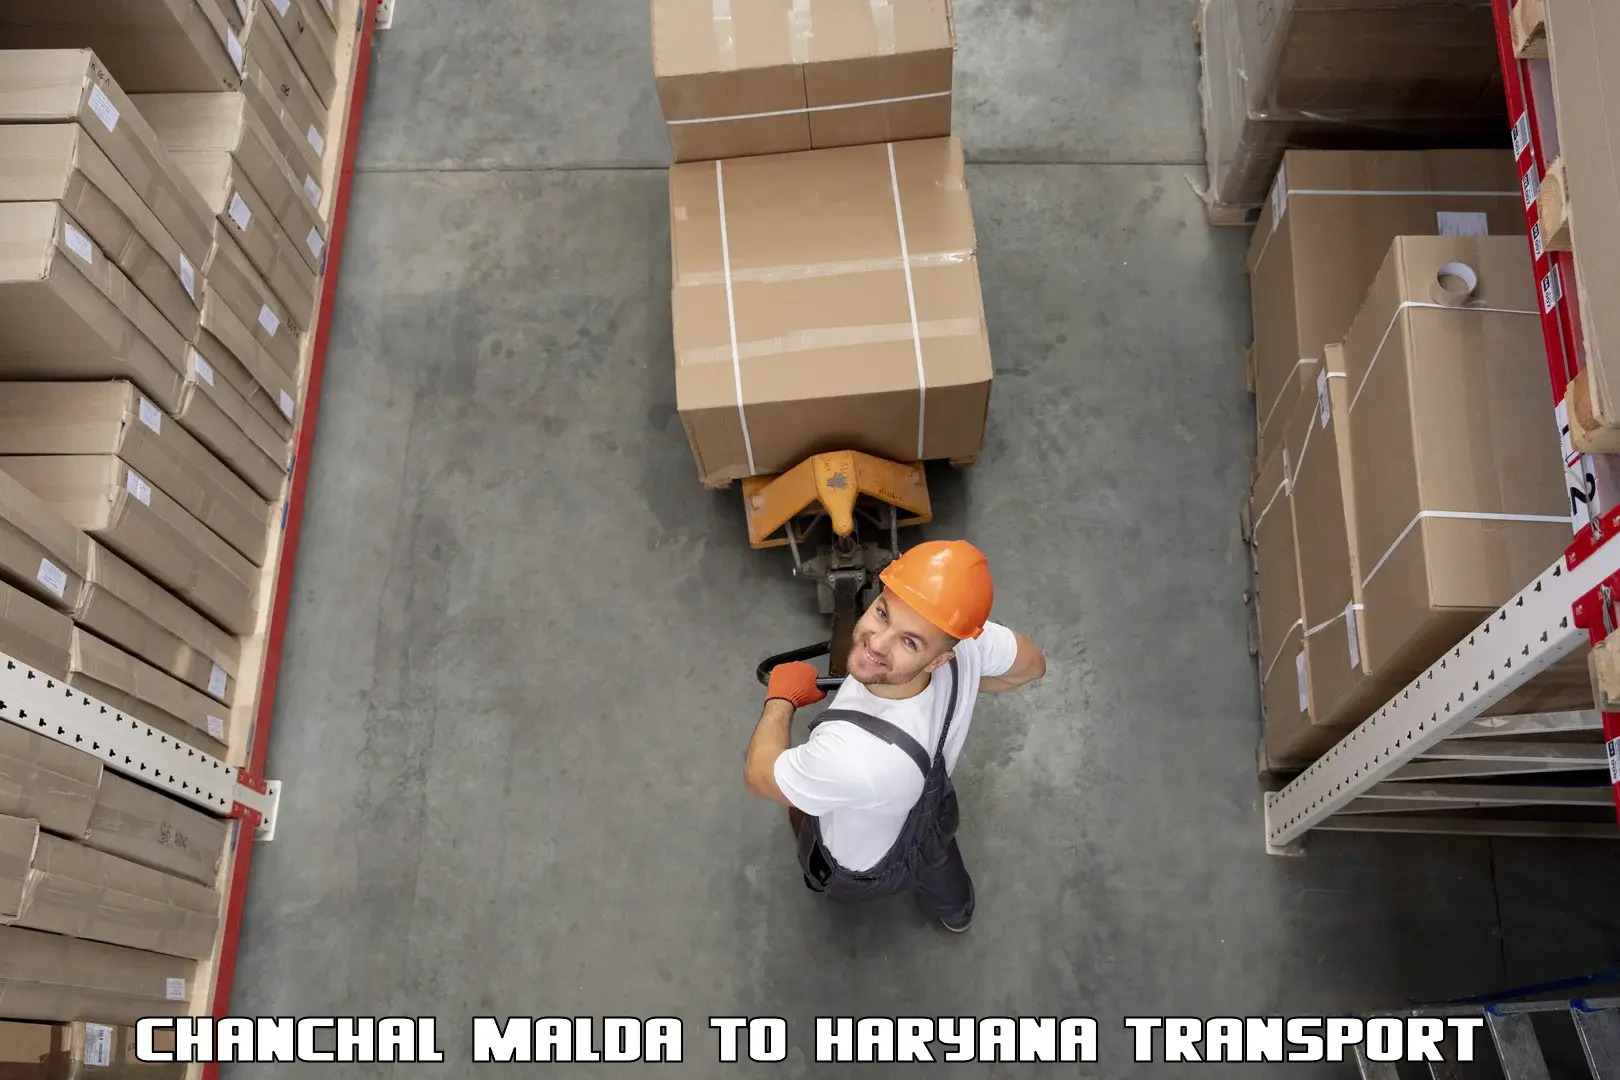 Commercial transport service Chanchal Malda to Haryana